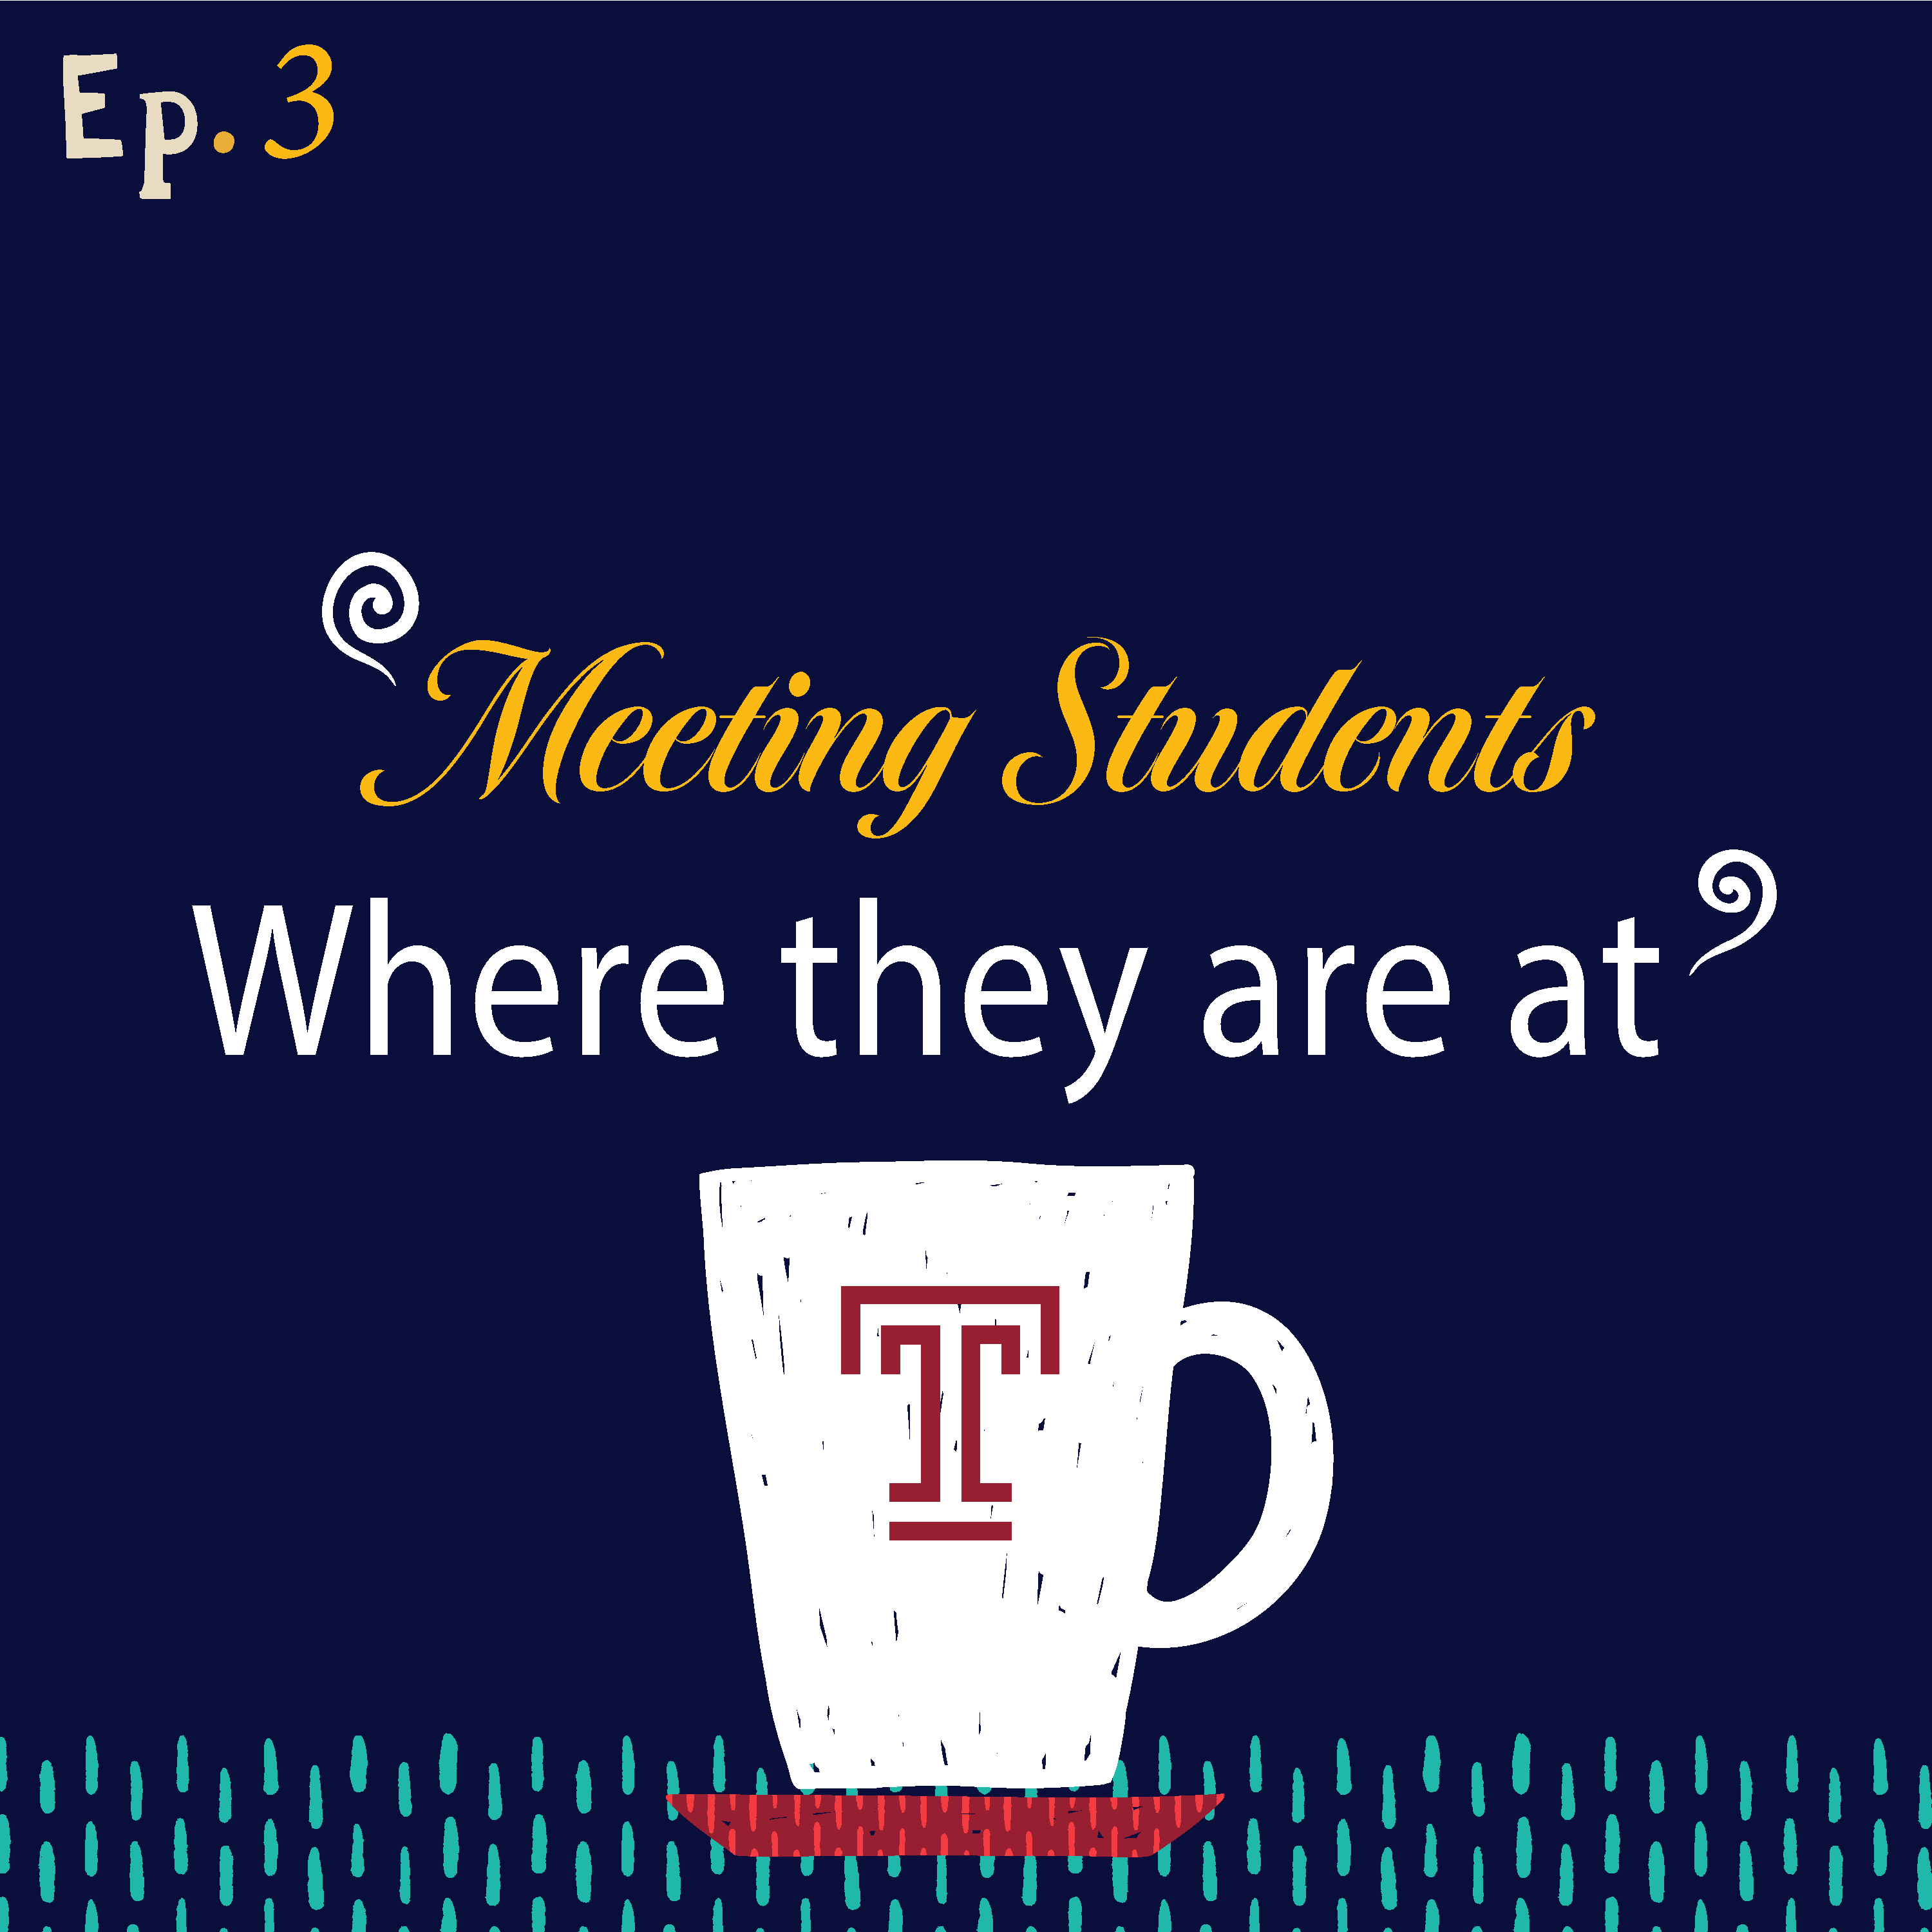 Meeting Students Where They Are At